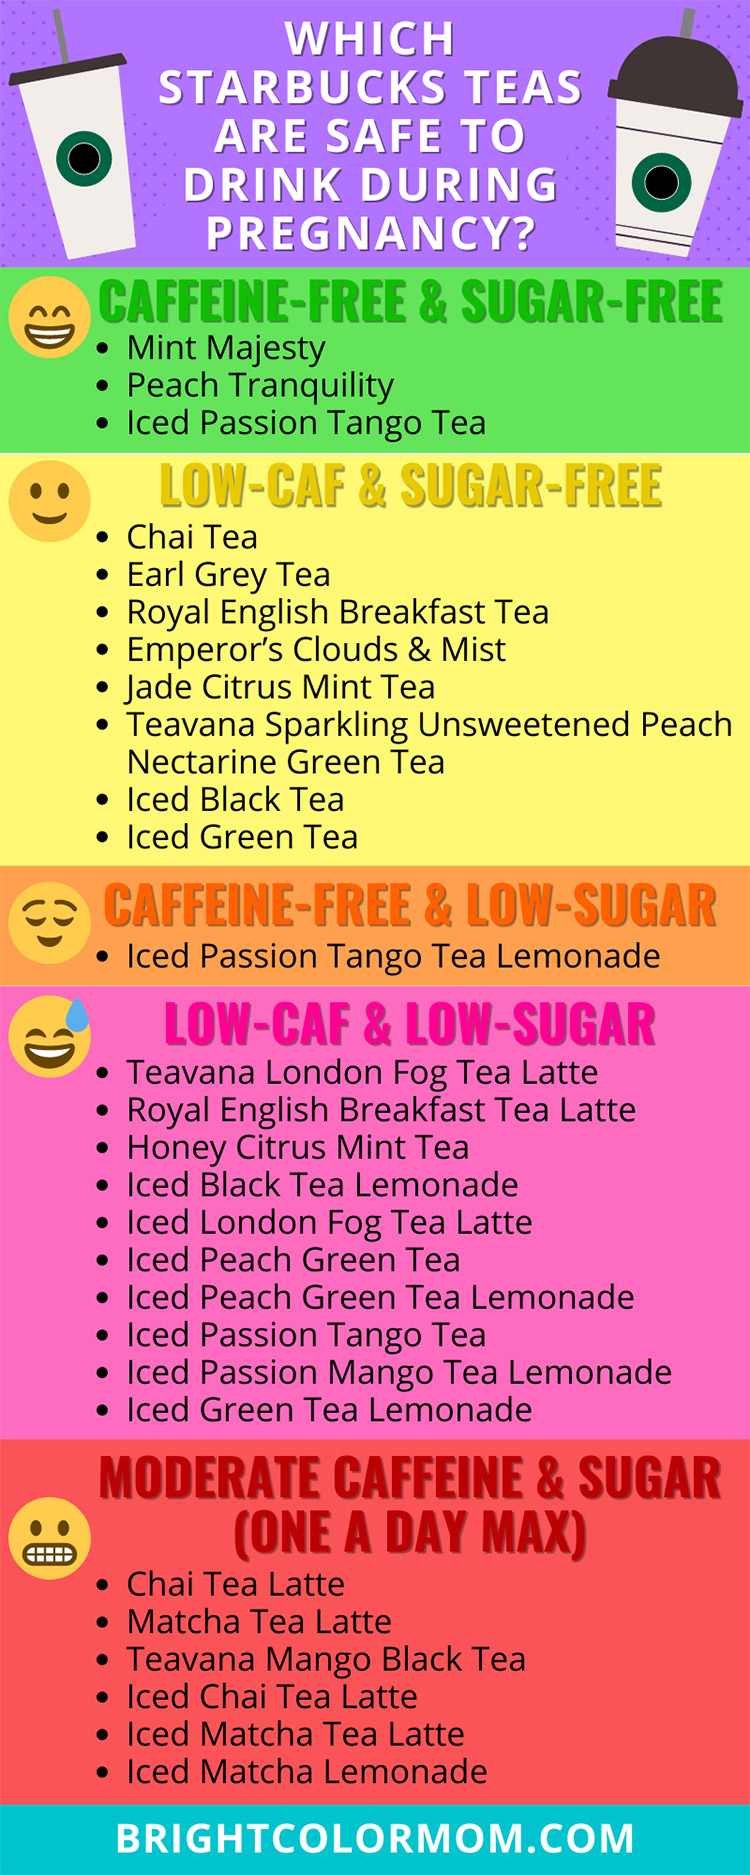 infographic listing every safe tea-based Starbucks drink to have during pregnancy, divided into caffeine and sugar-free, low-caf and sugar-free, caffeine-free and low-sugar, low-caf and low-sugar, and moderate caffeine and sugar